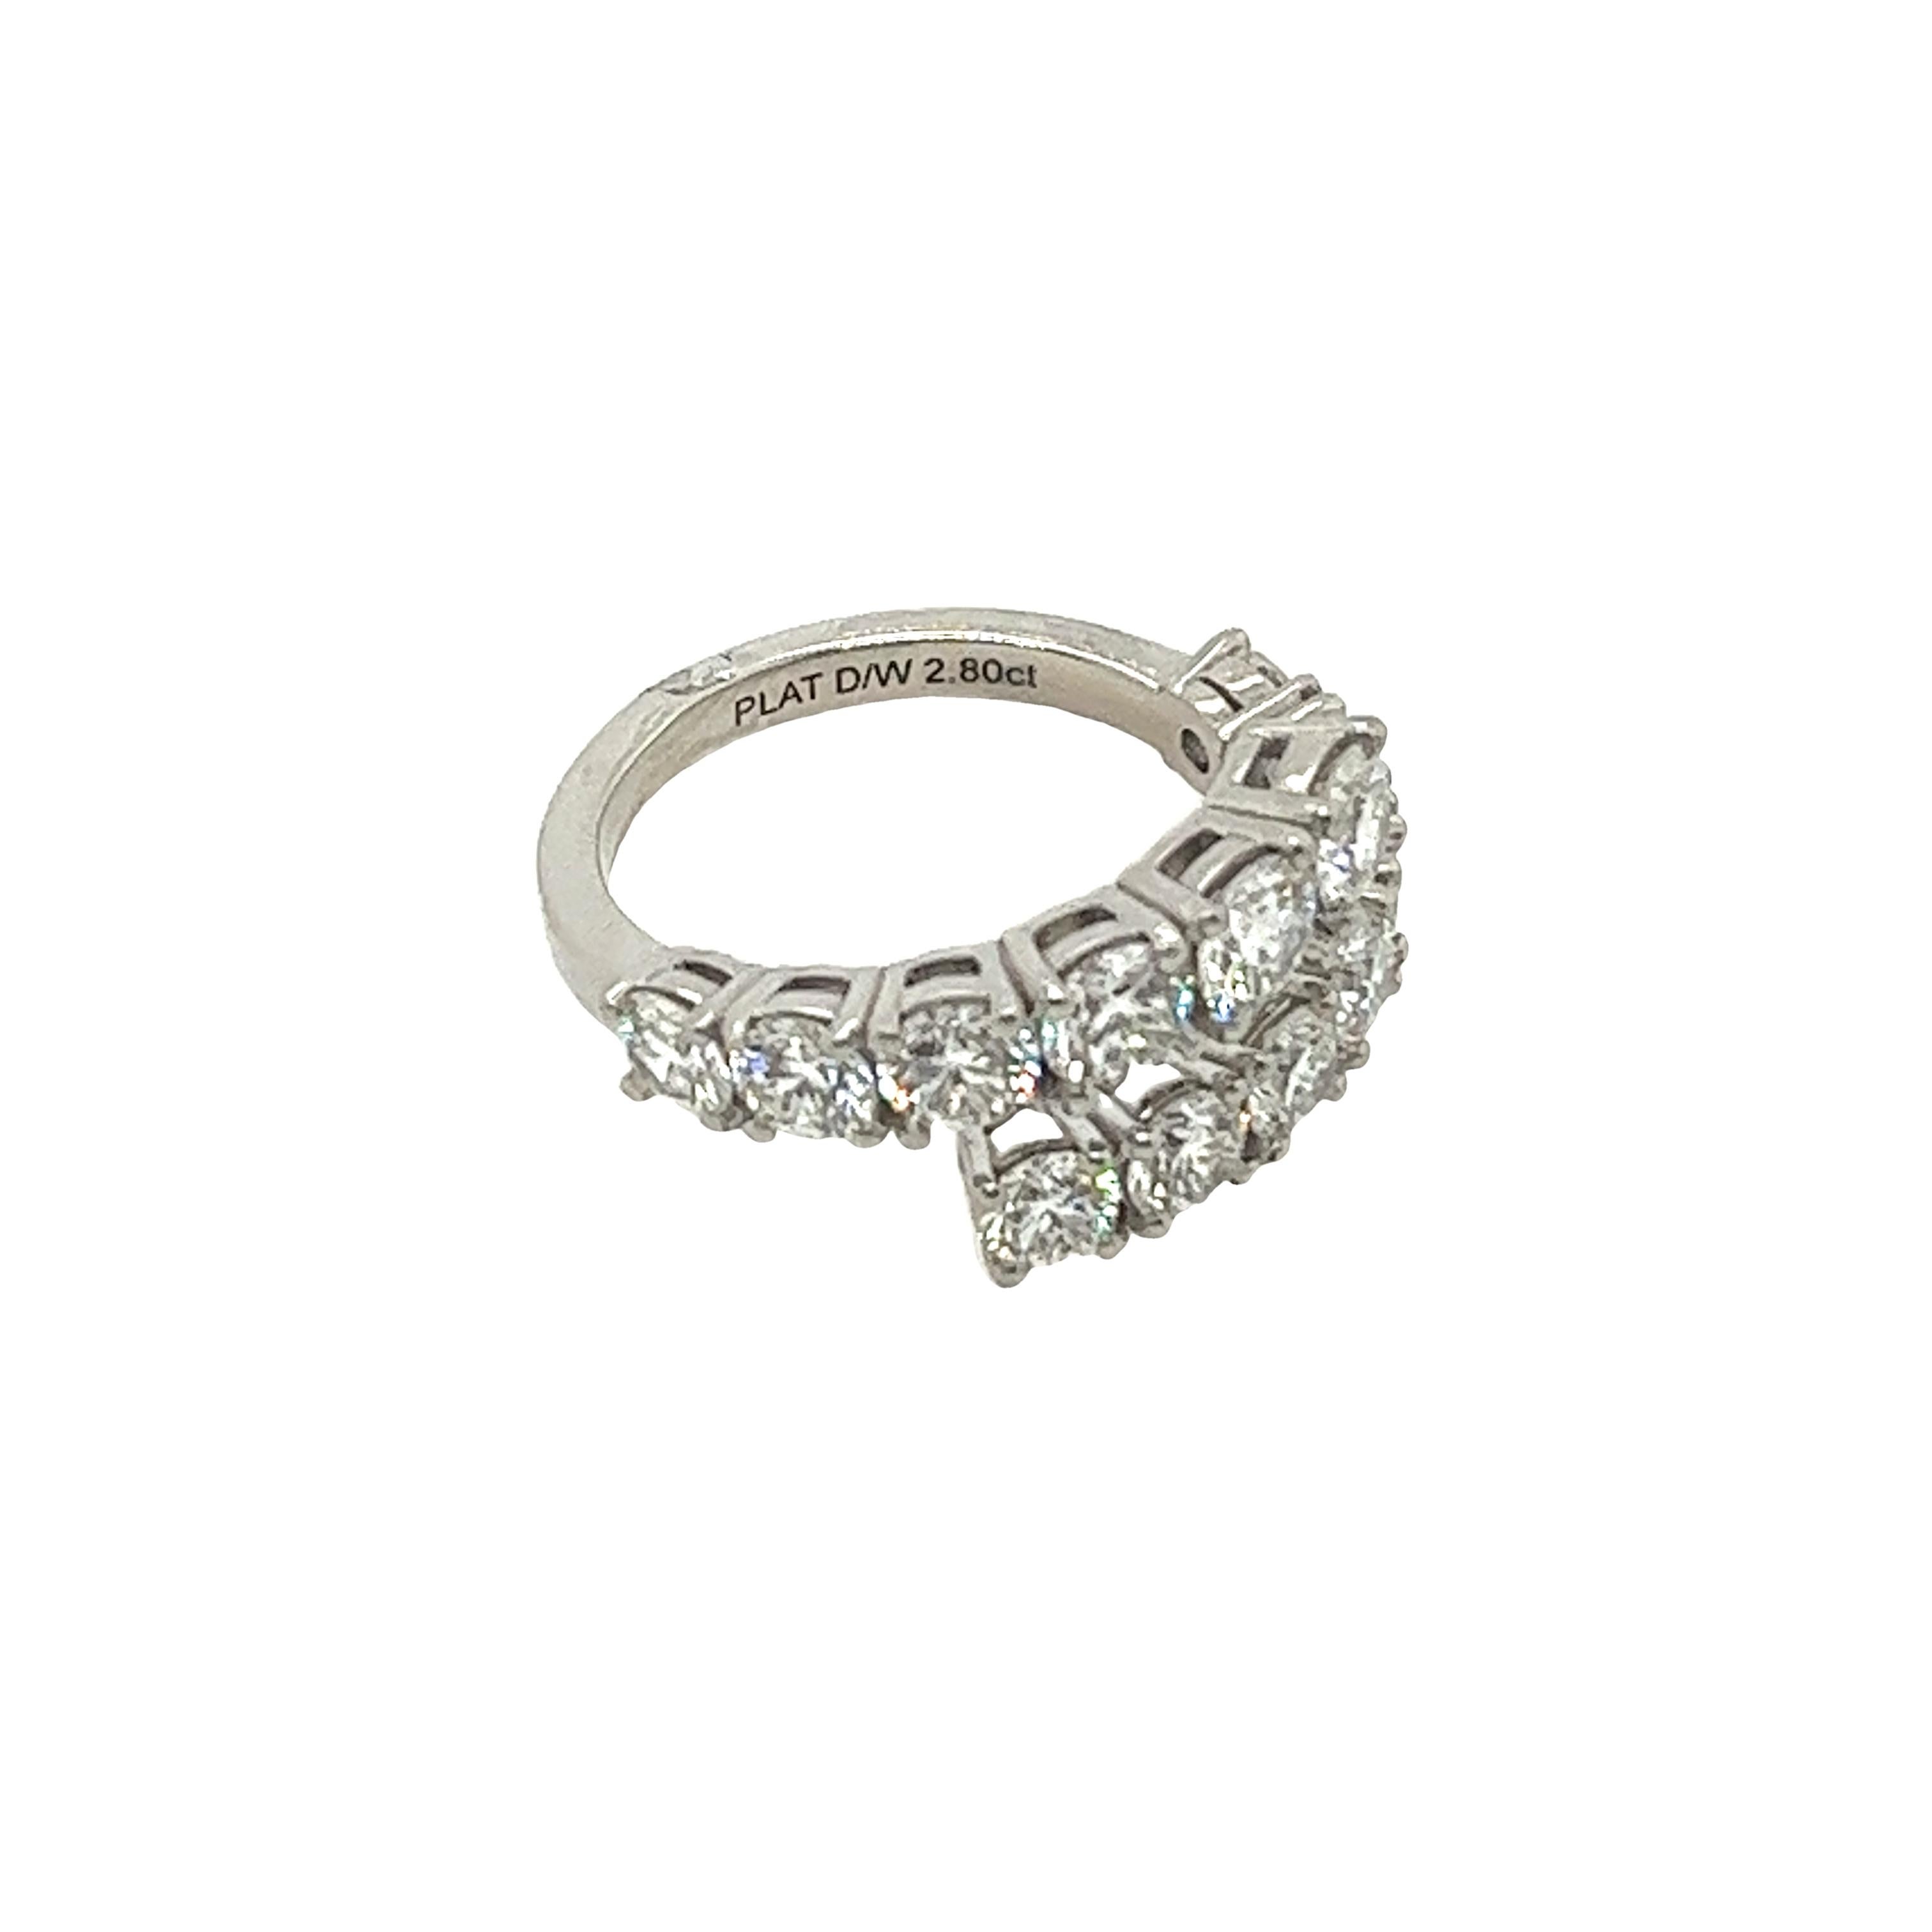 Diamond Coil Dress Ring, Set With 2.80ct G/VS1 Round Diamonds Set In Platinum For Sale 1